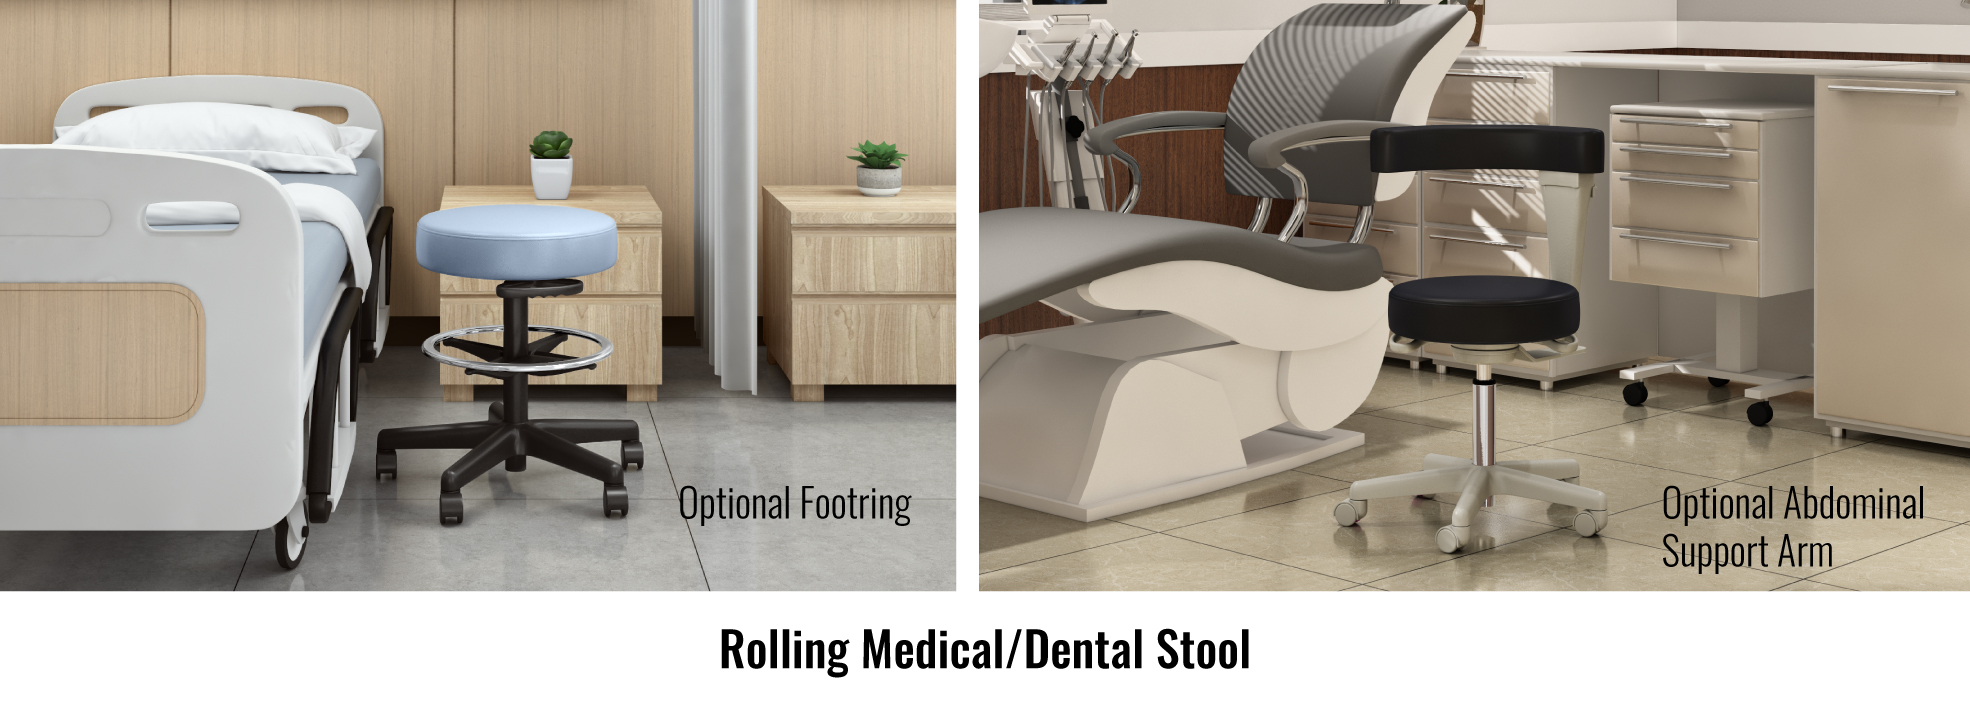 Rolling medical or dental stool with optional footring and optional abdominal support arm